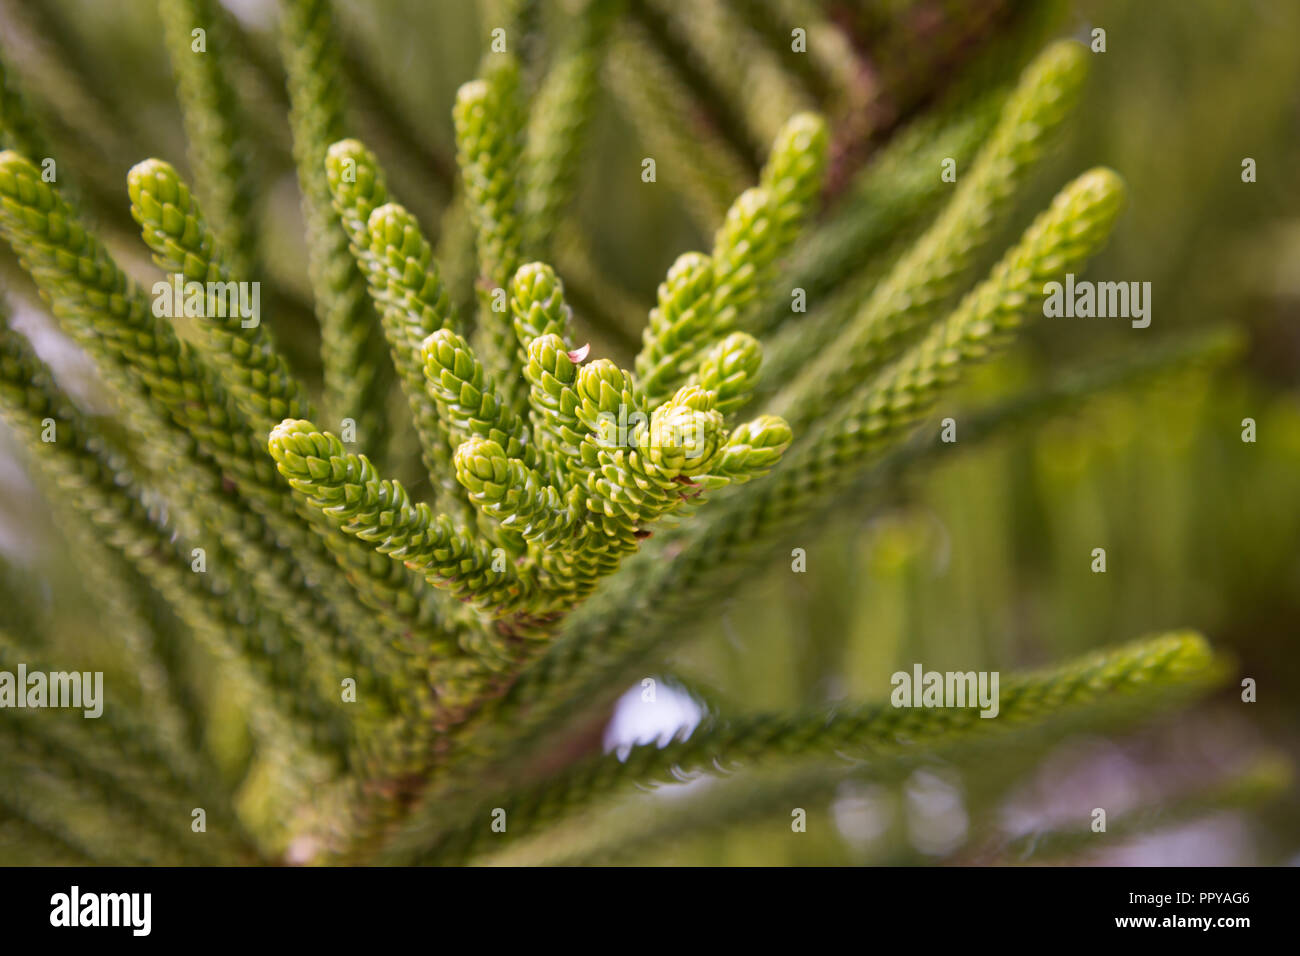 Close-up of evergreen tree araucaria heterophylla branches with small needles Stock Photo